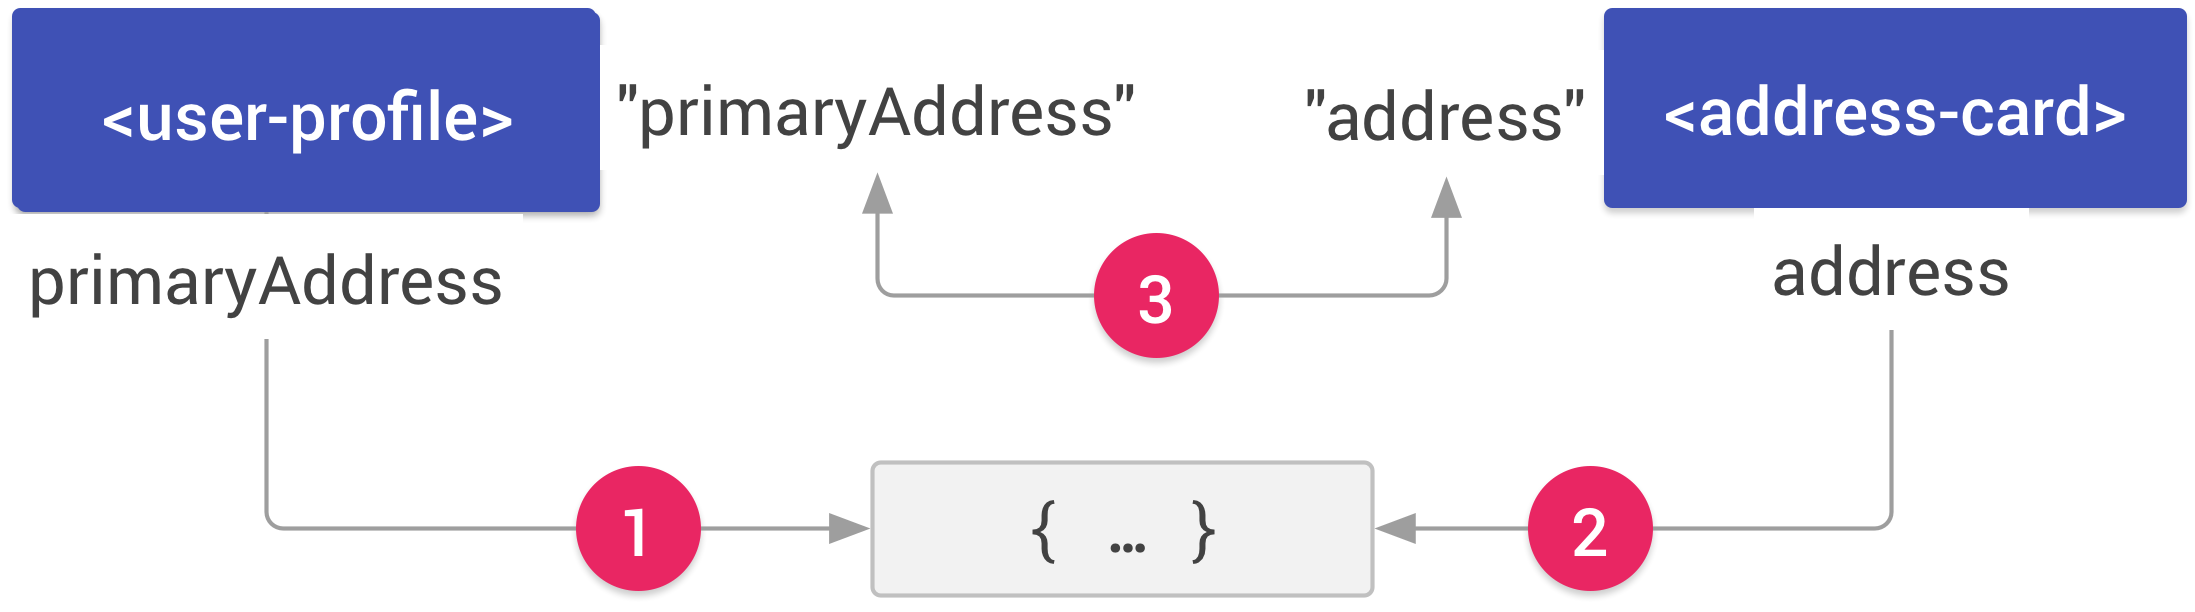 Two elements, user-profile and address-card, both referring to a shared JavaScript object. An arrow labeled 1 connects the primaryAddress property on the user-profile element to the object. An arrow labeled 2 connects the address property on the address-card element to the same object. An double-headed arrow labeled 3 connects the path primaryAddress on user-profile to the path address on address-card.